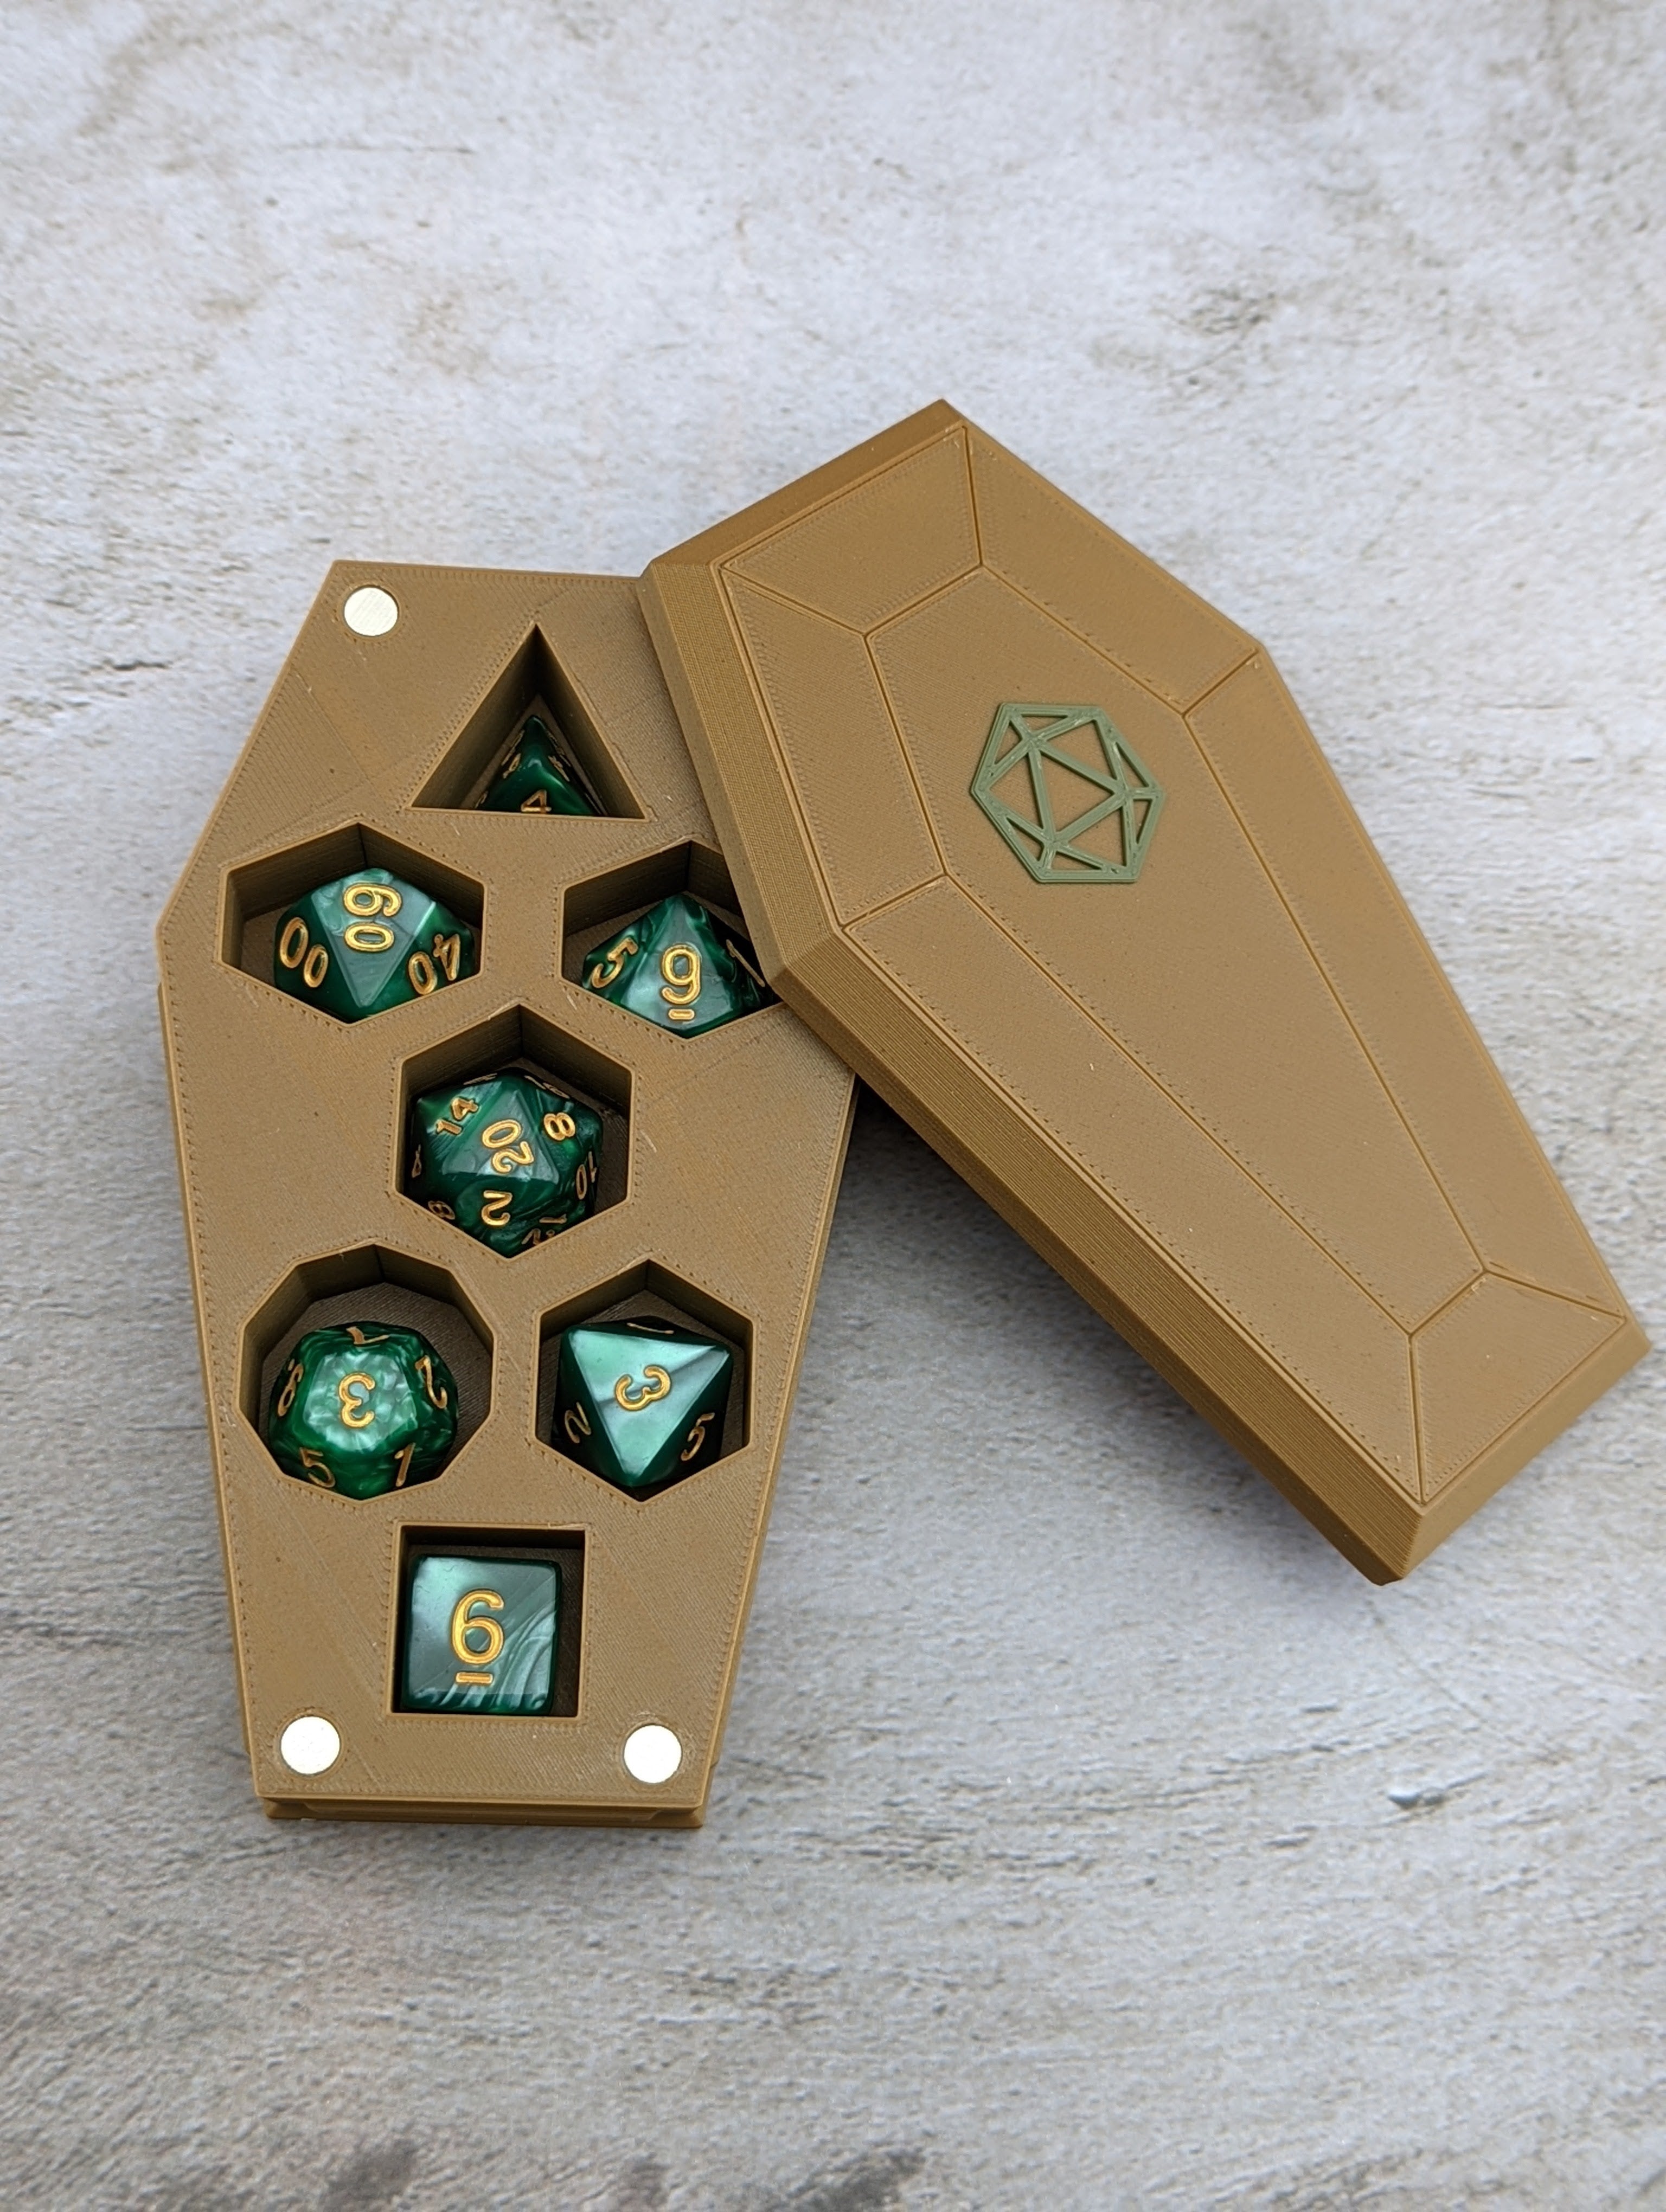 Coffin Dice Vault with Magnetic Lid